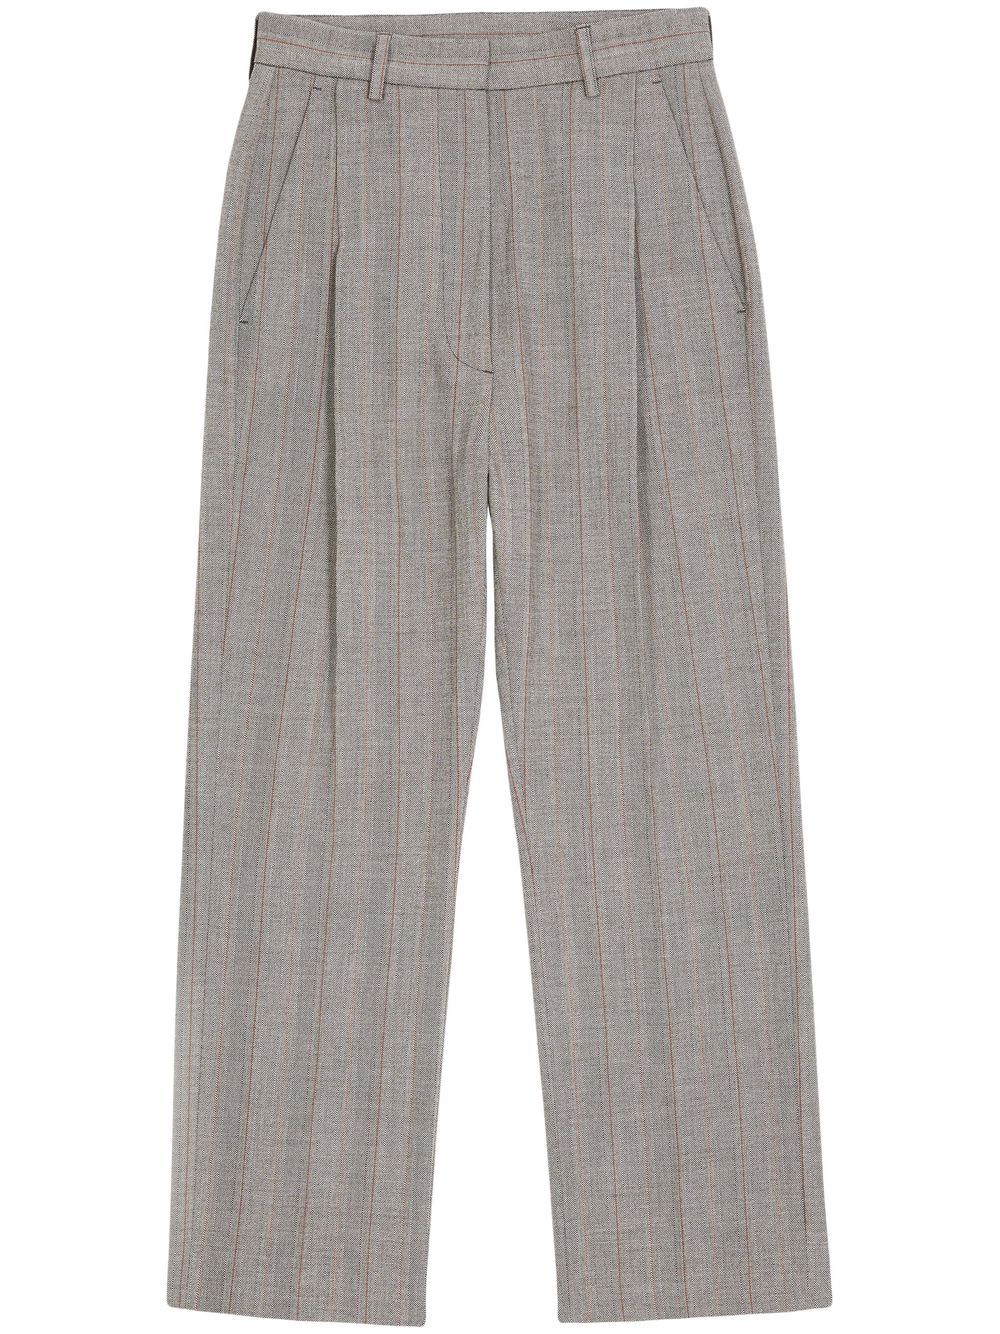 Mm6 Maison Margiela Striped Tailored Cropped Trousers In Grey